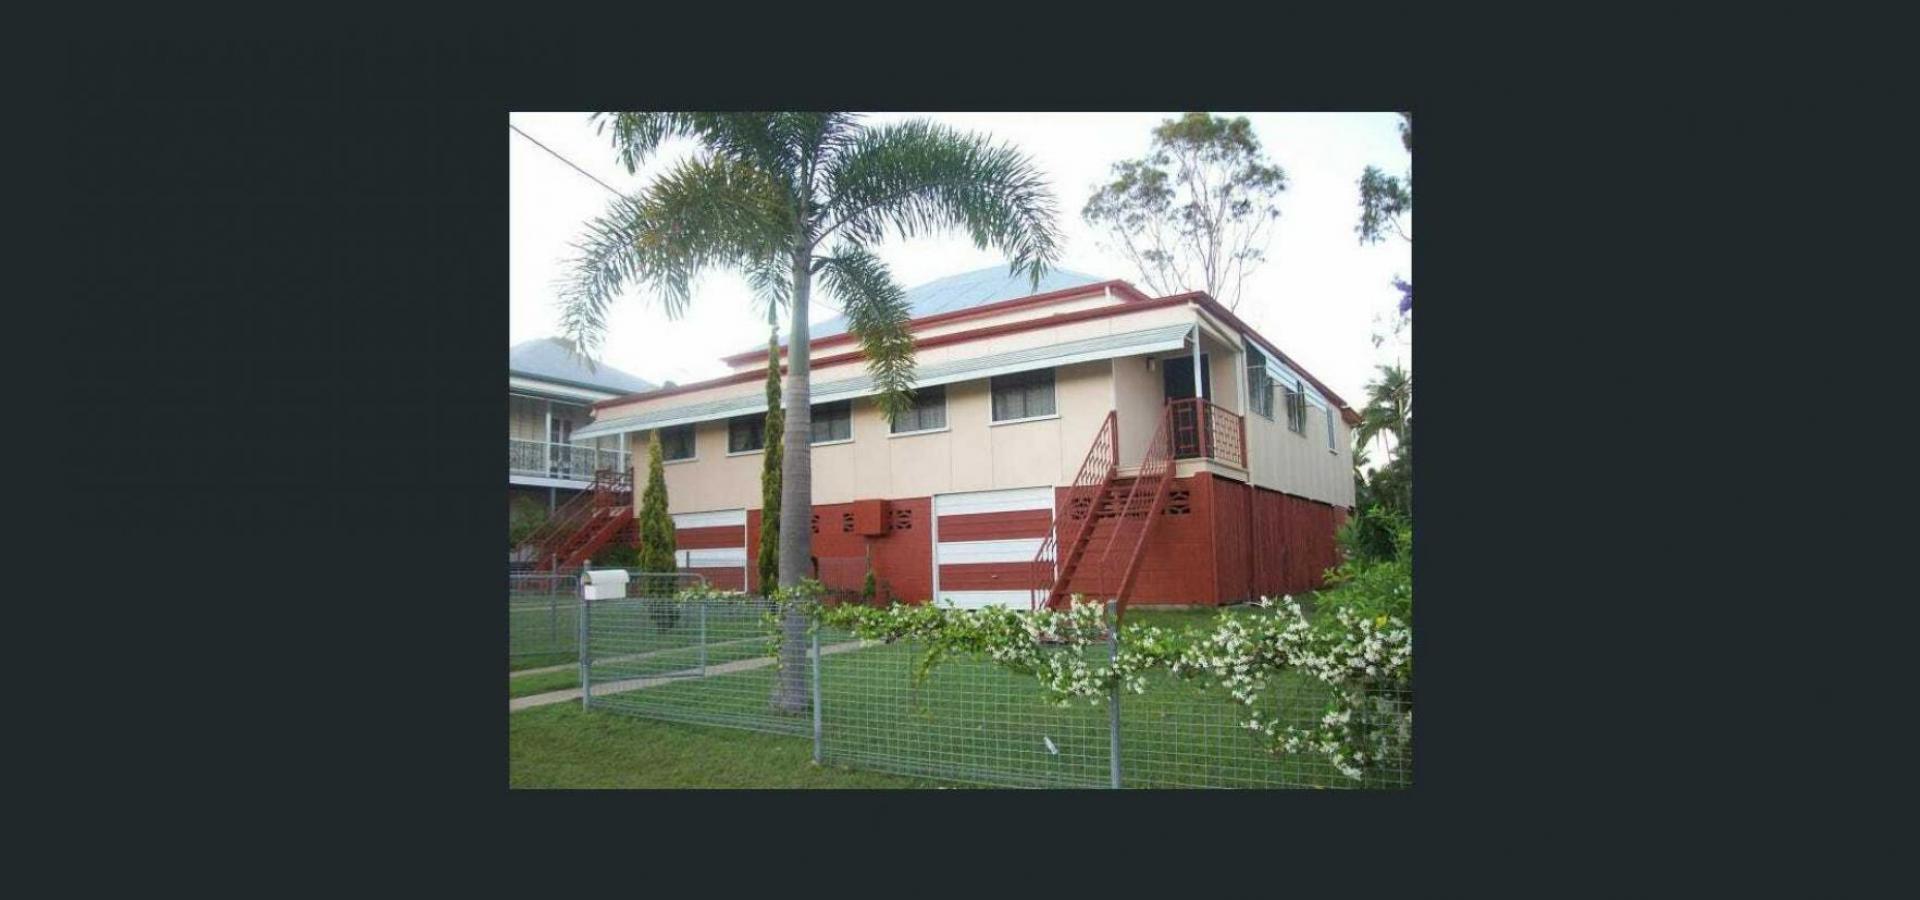 Awesome Value for the Investor! 2 Units on prime 956m2 real estate at 22 Separation Street in Allenstown, Rockhampton with good weekly return.